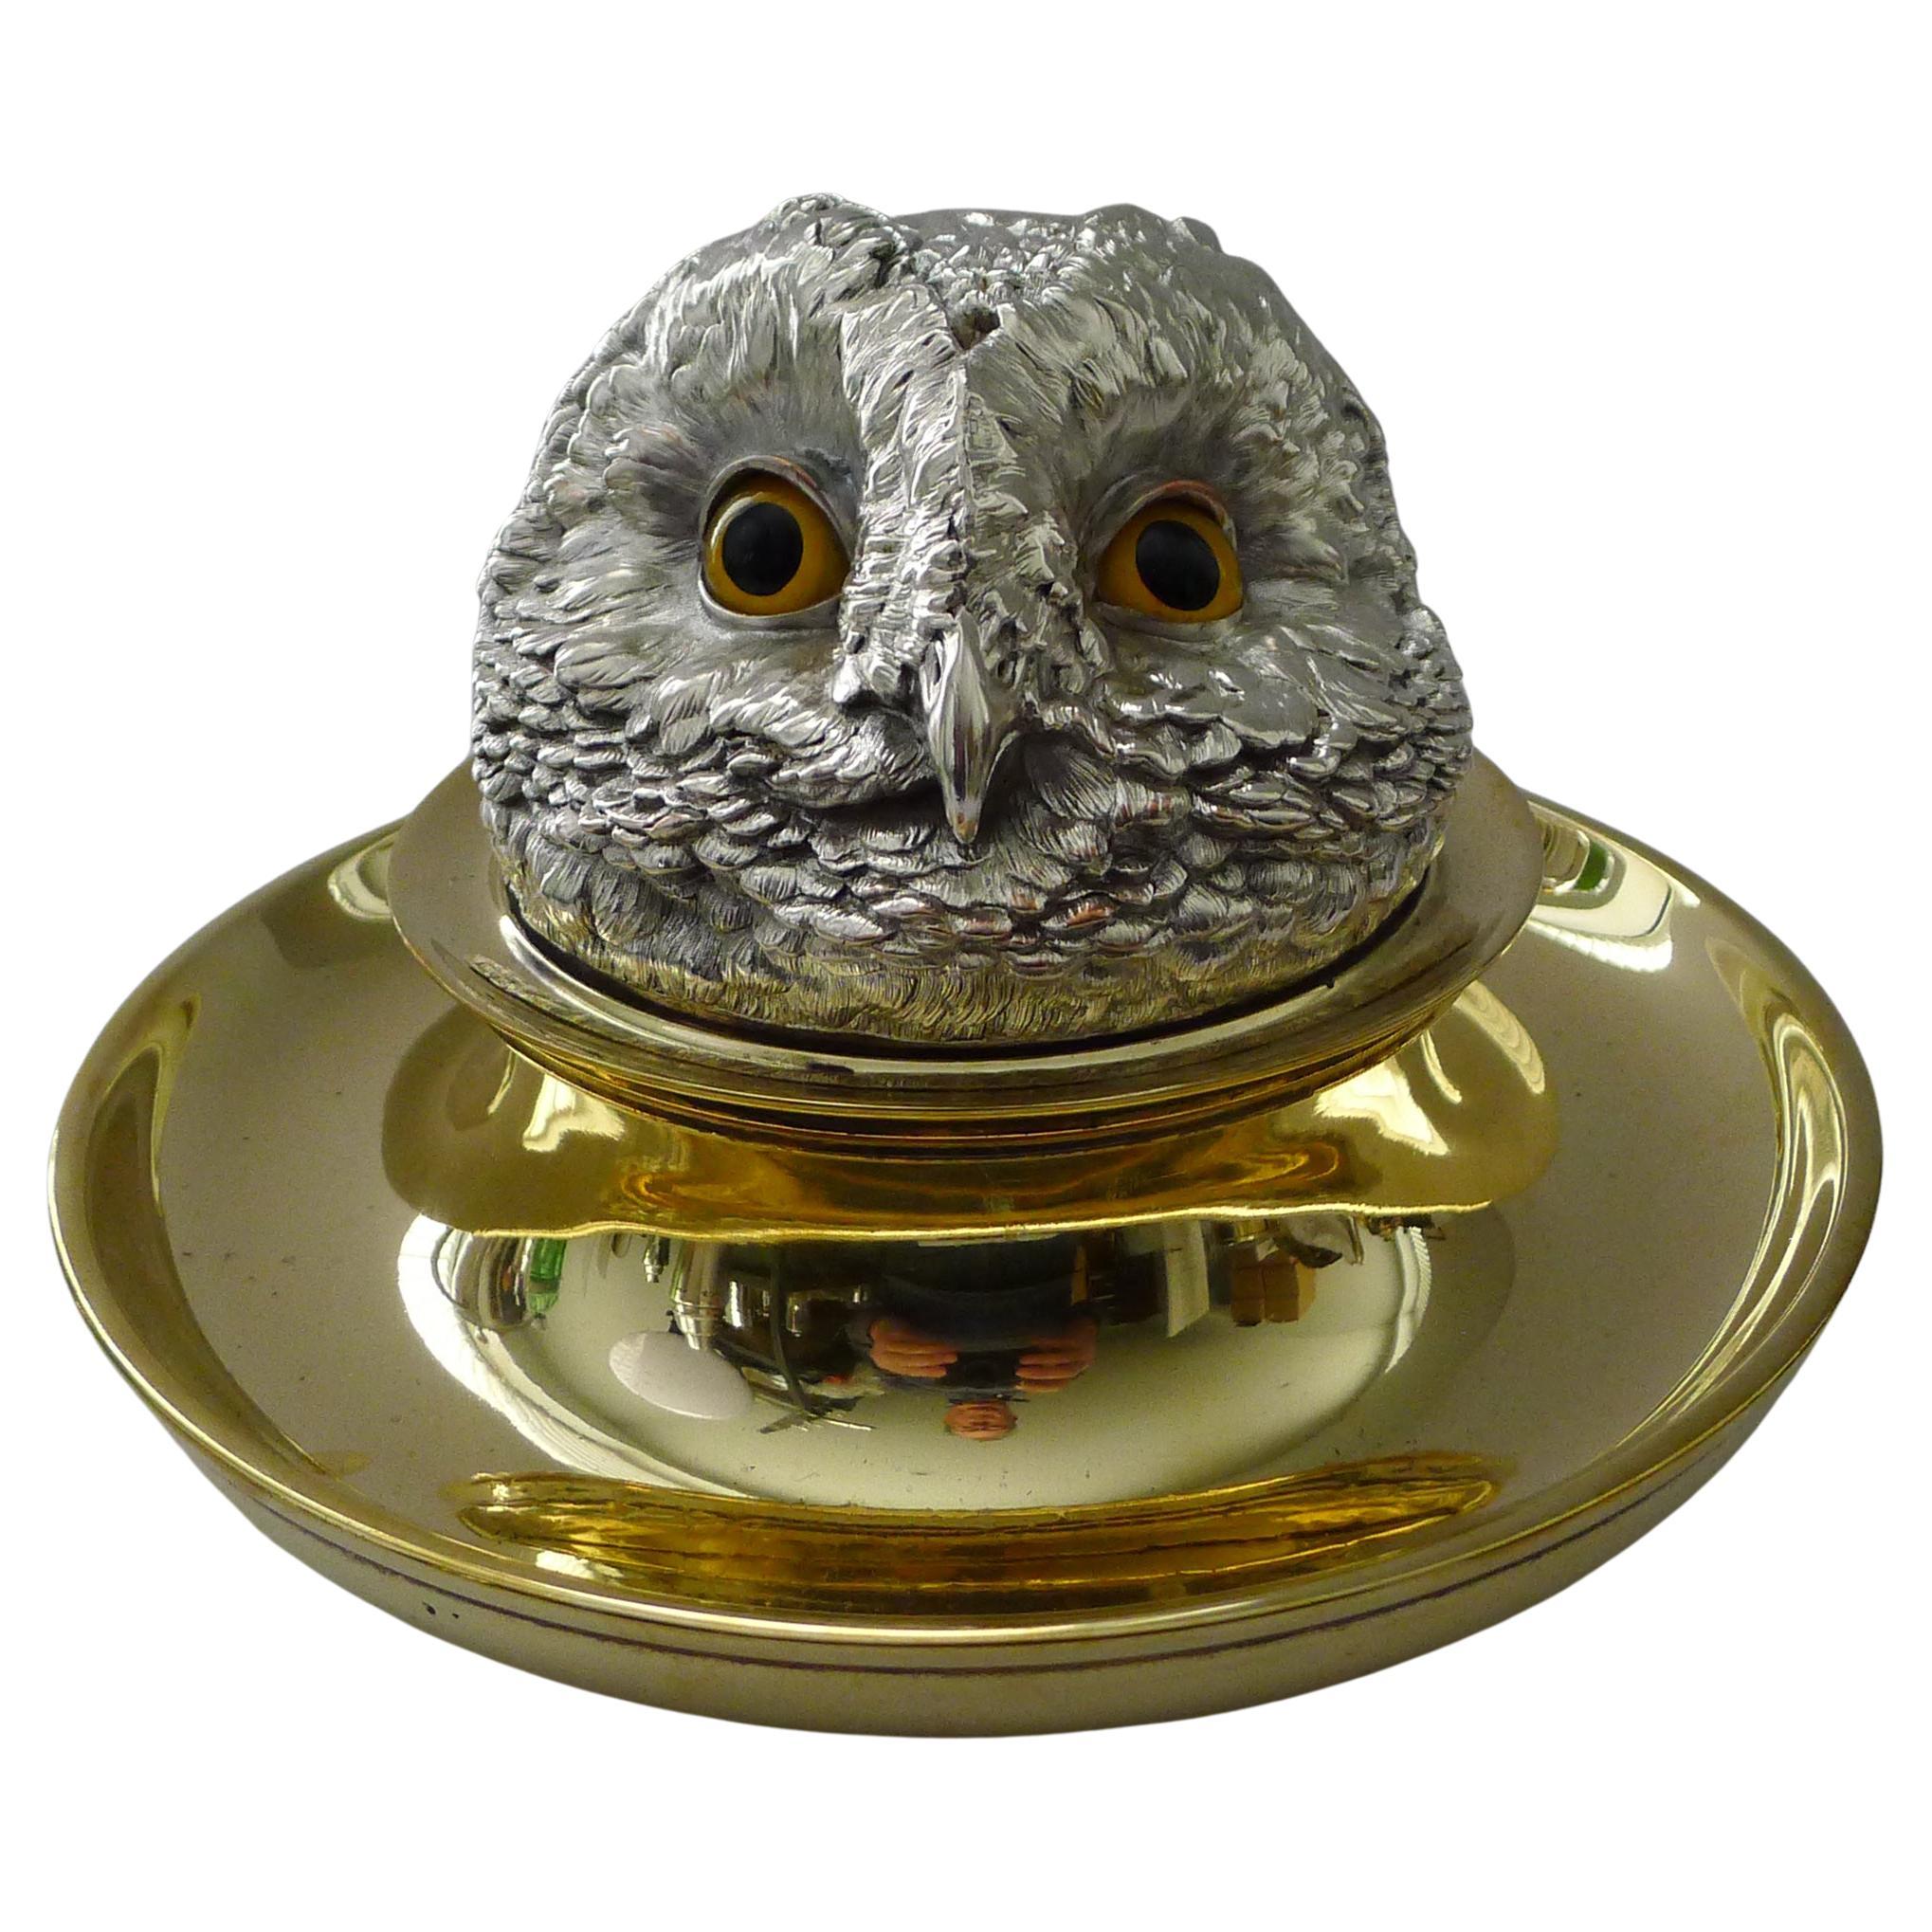 Rare Mammoth English Victorian Novelty Inkwell, Owl with Glass Eyes C.1880